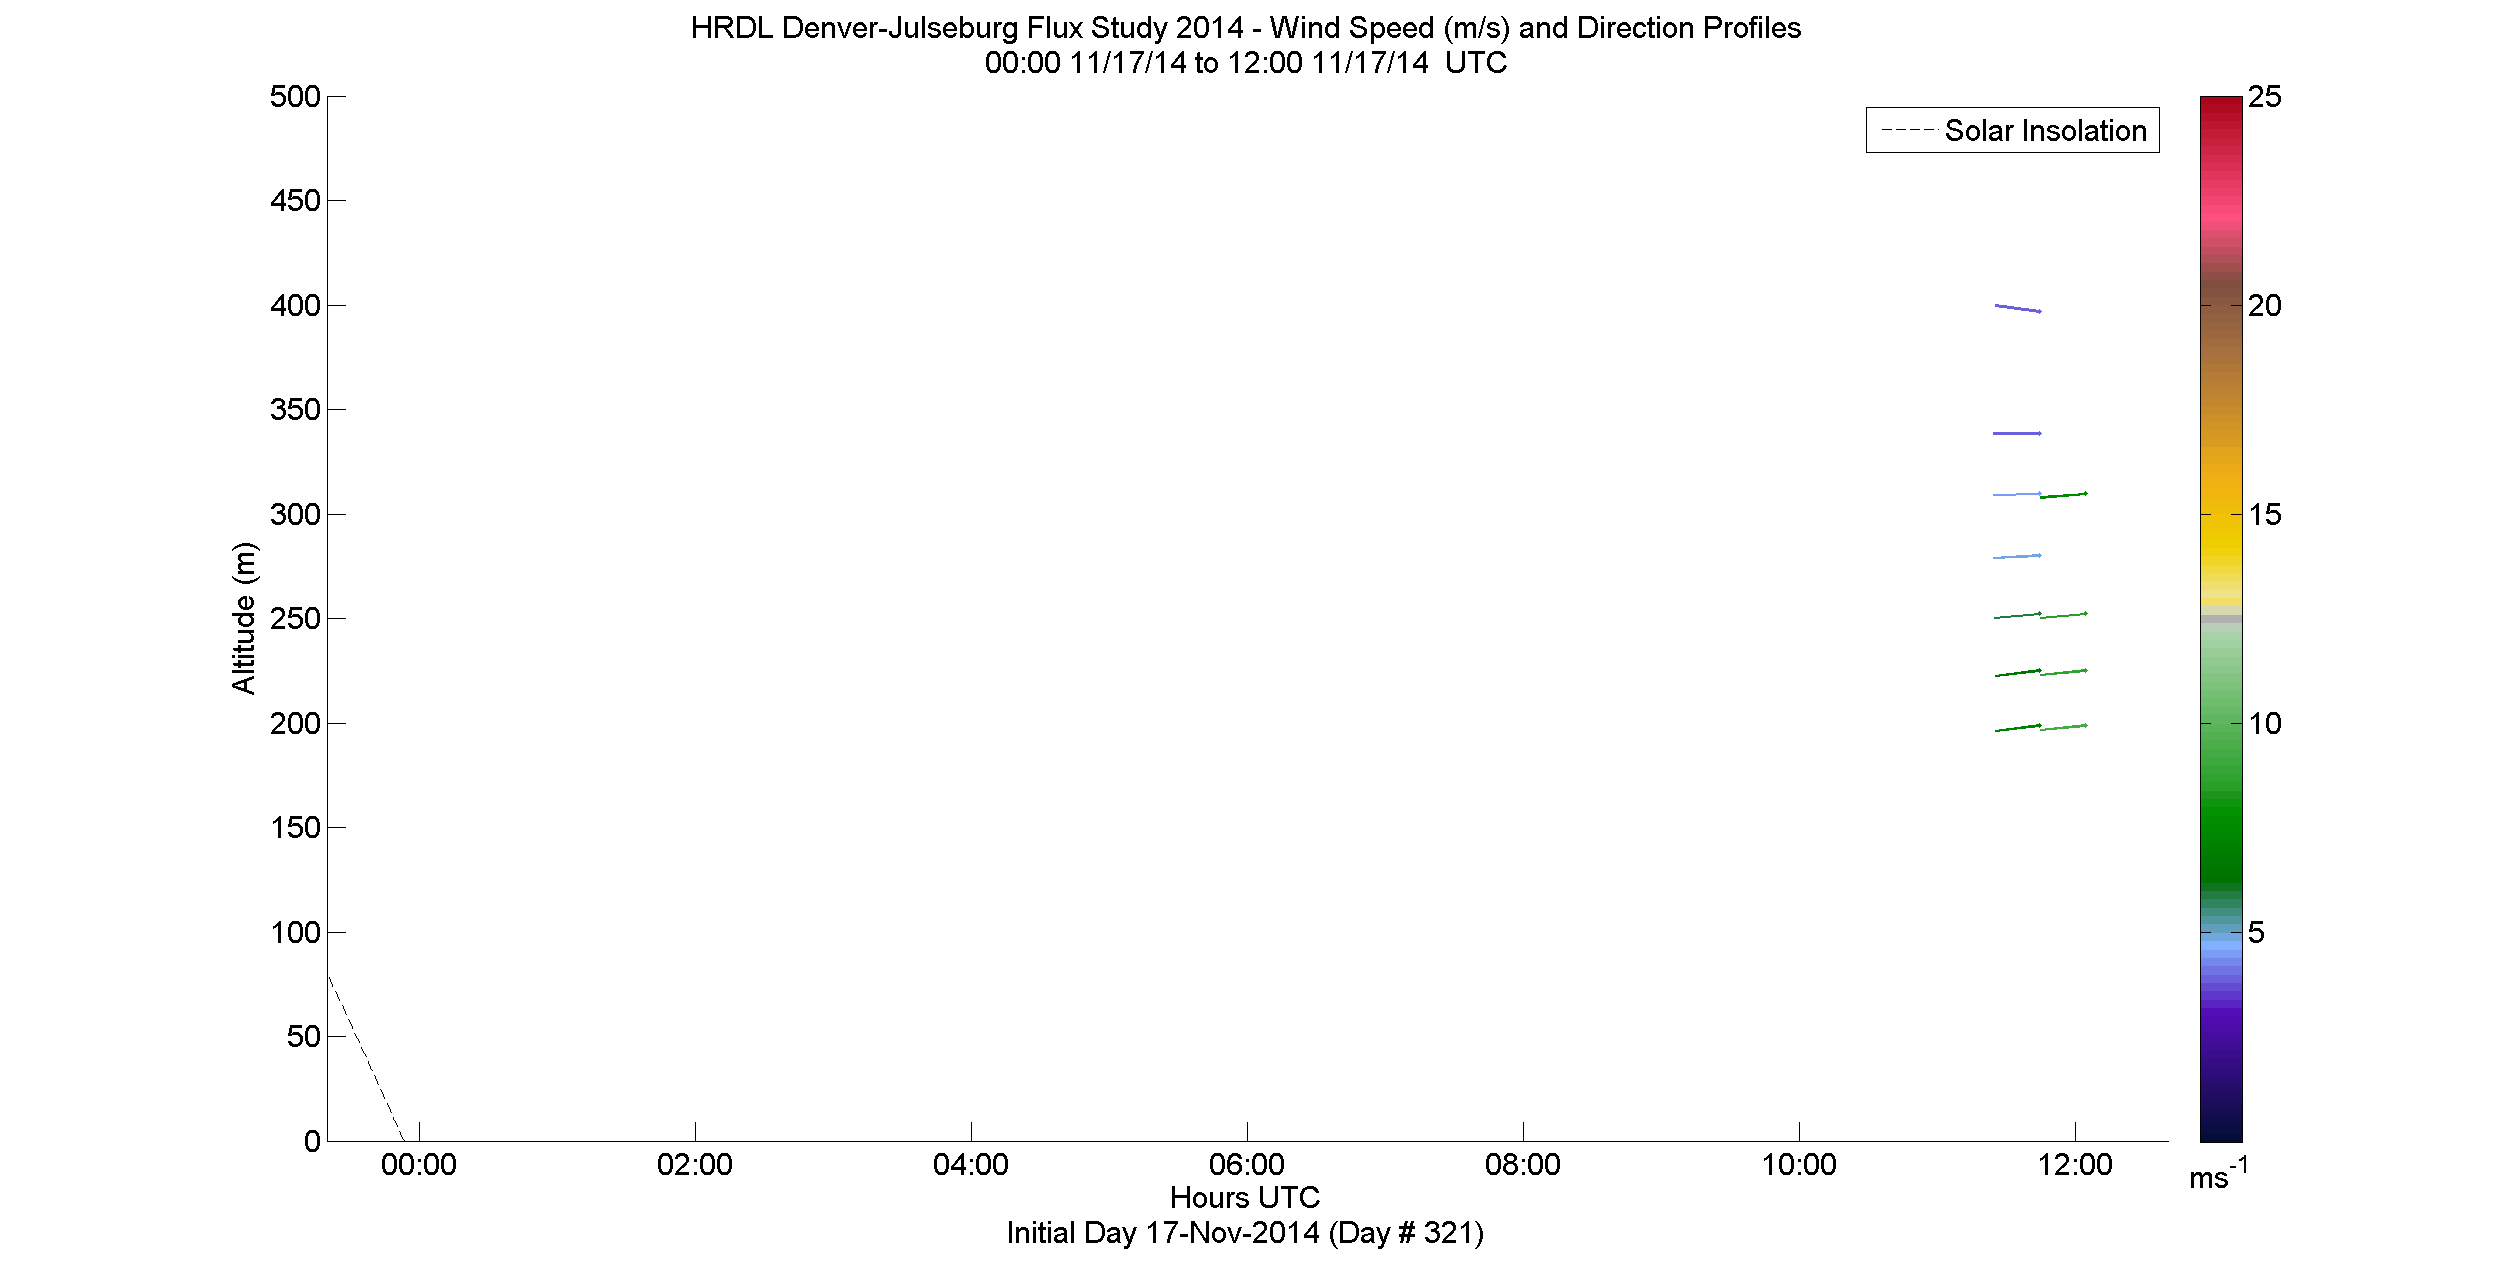 HRDL speed and direction profile - November 17 am